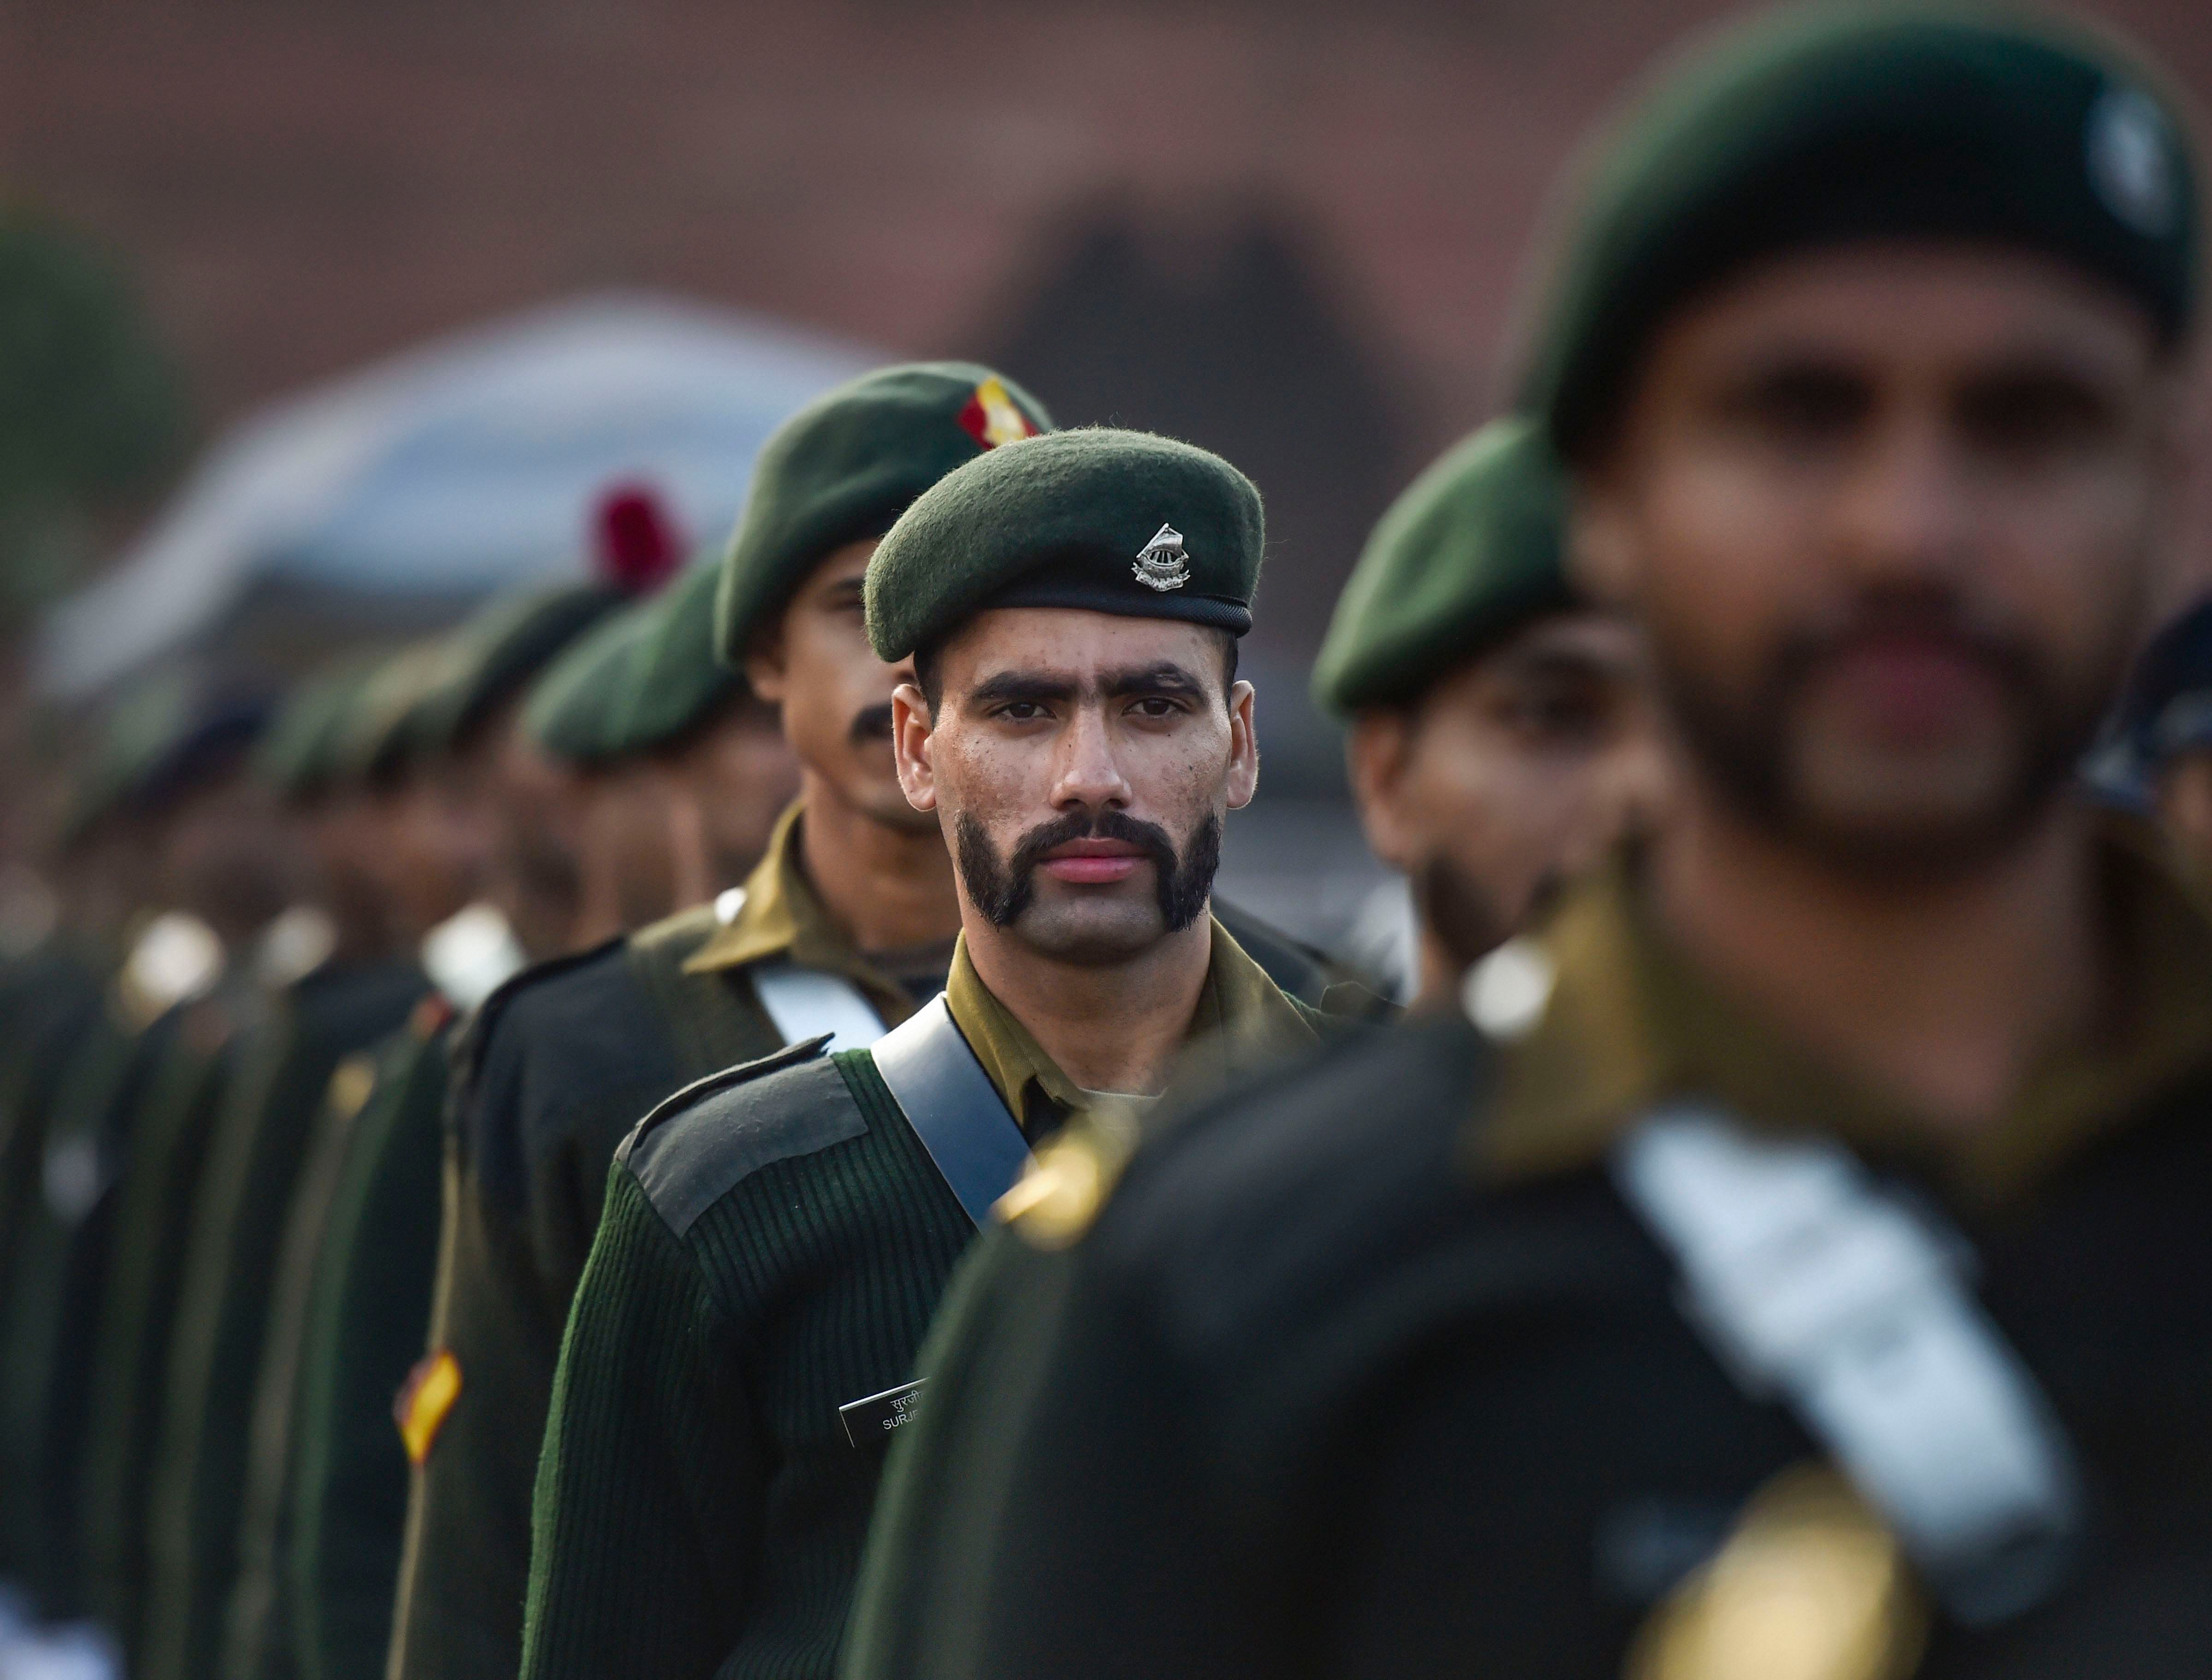  Jawans during the 'Beating Retreat' rehearsal in New Delhi, Wednesday, Jan. 22, 2020. The ceremony held on January 29 every year marks the culmination of the four-day-long Republic Day celebrations. (PTI Photo)